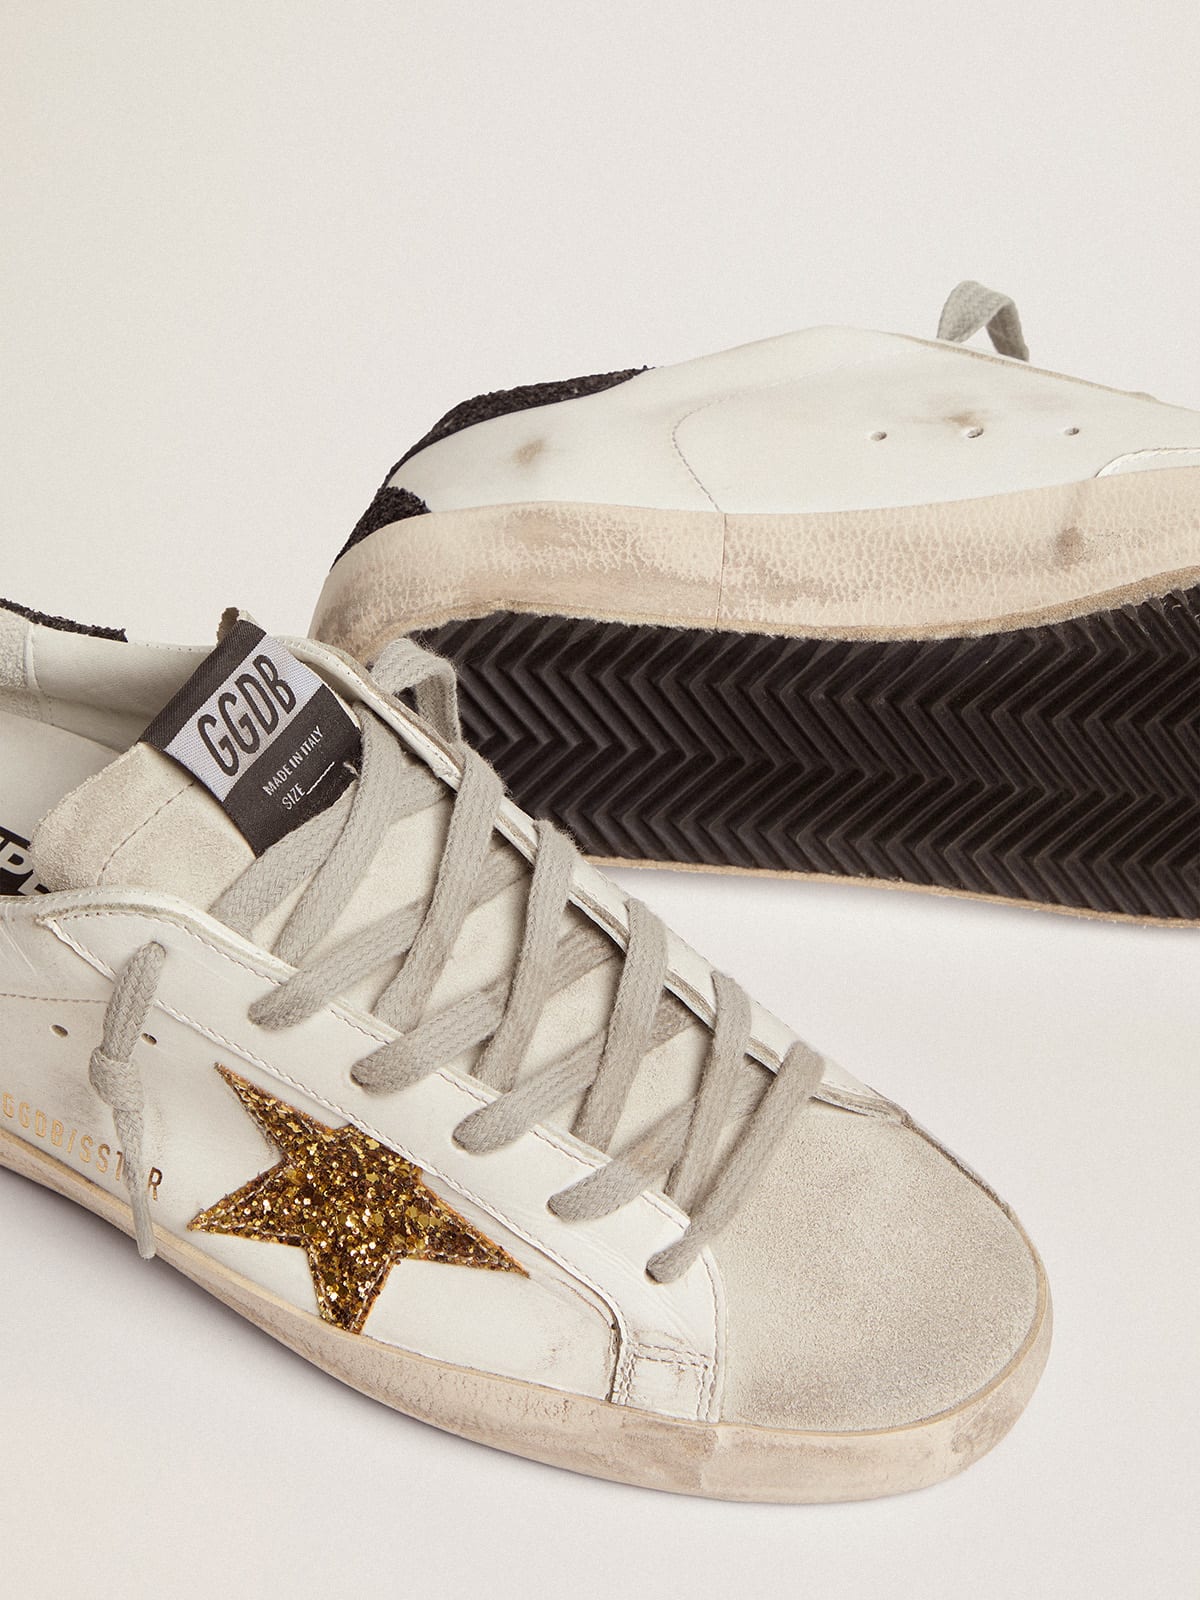 Golden Goose - Super-Star sneakers with gold star and glittery black heel tab in 